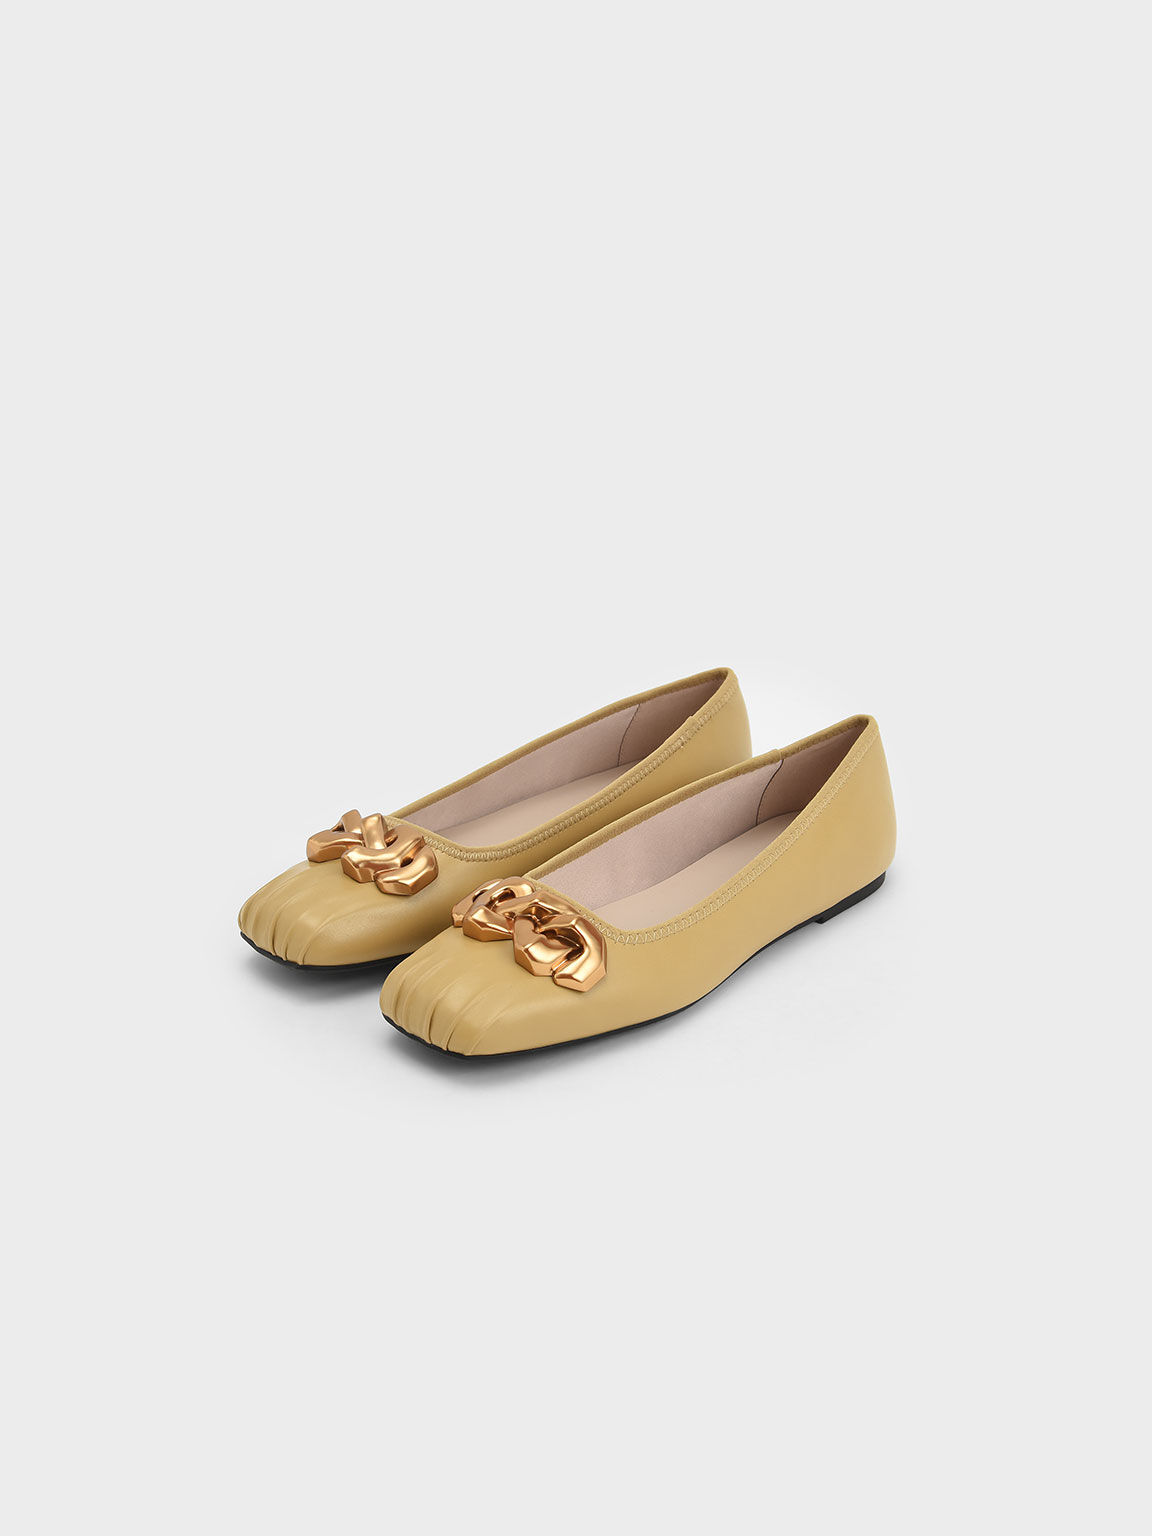 Ruched Square-Toe Chunky Chain-Link Ballerinas, Mustard, hi-res